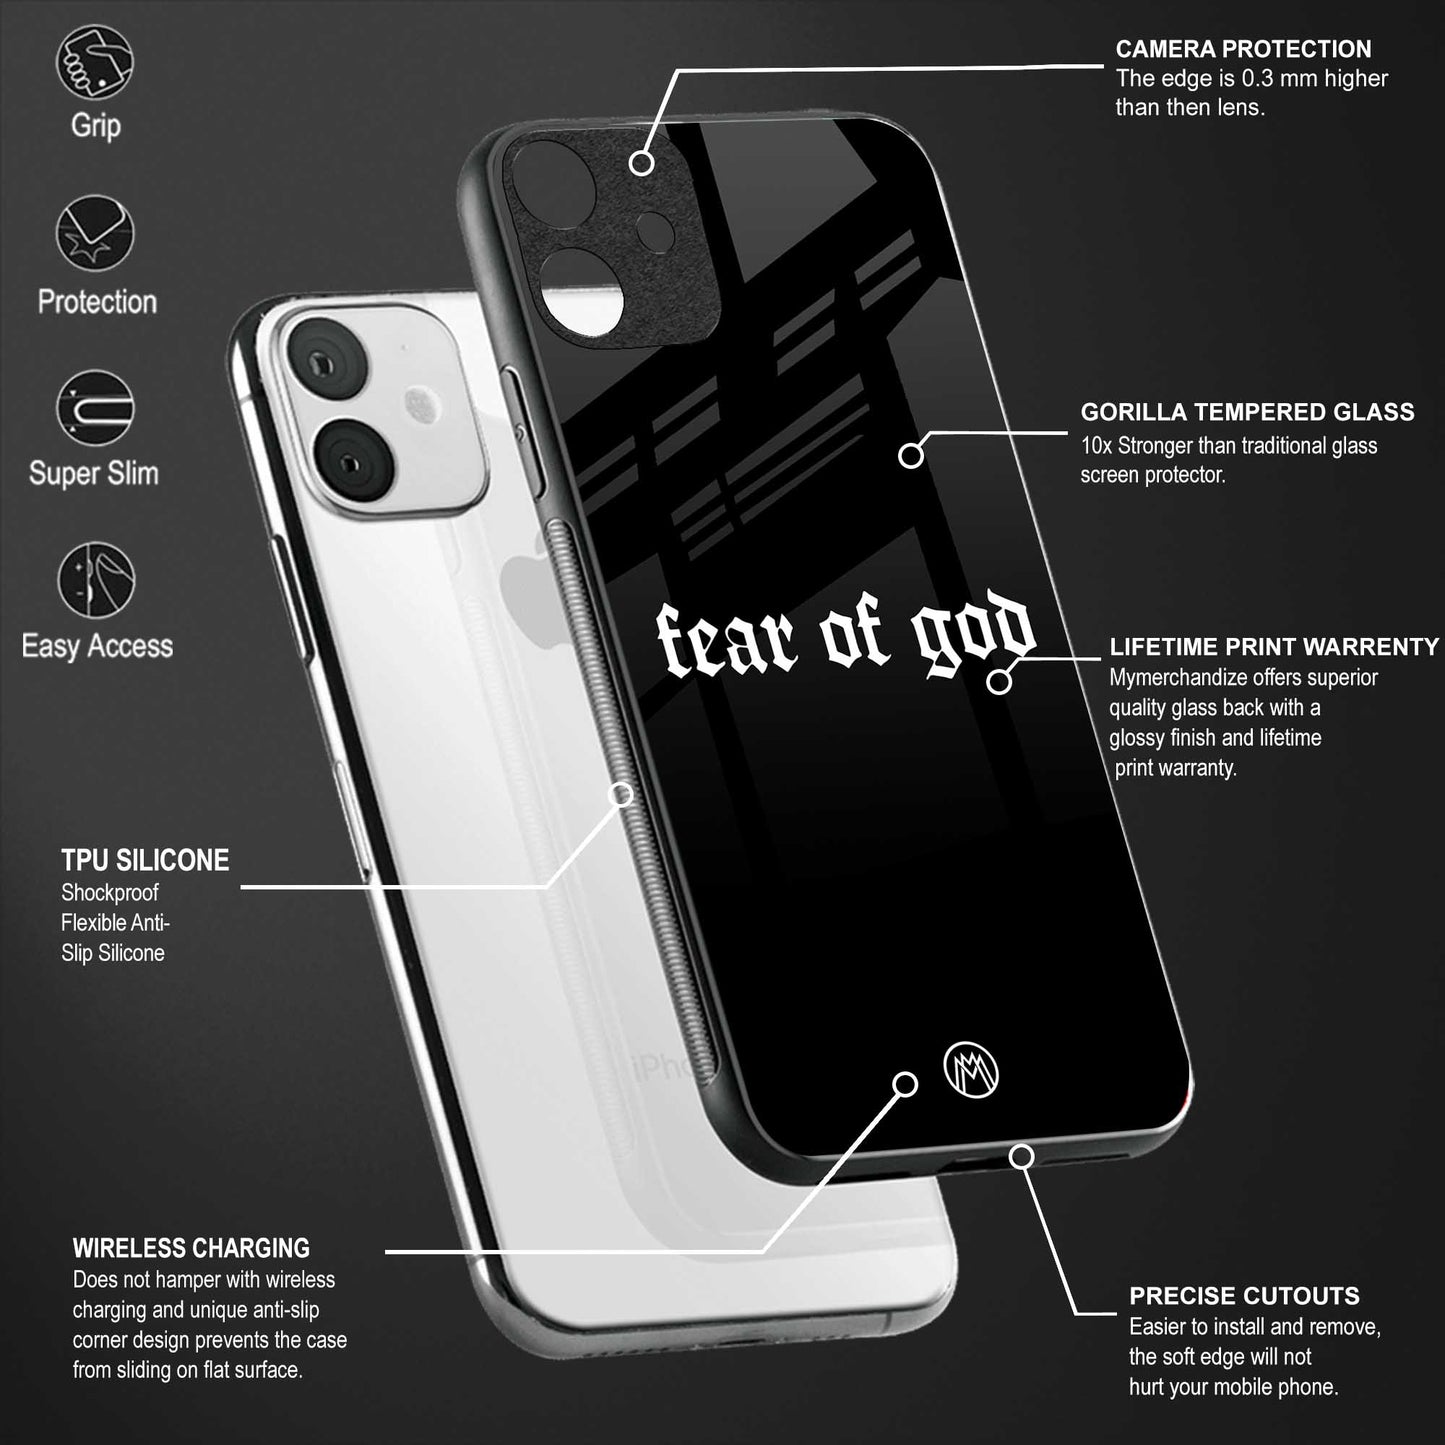 fear of god phone cover for oppo f19